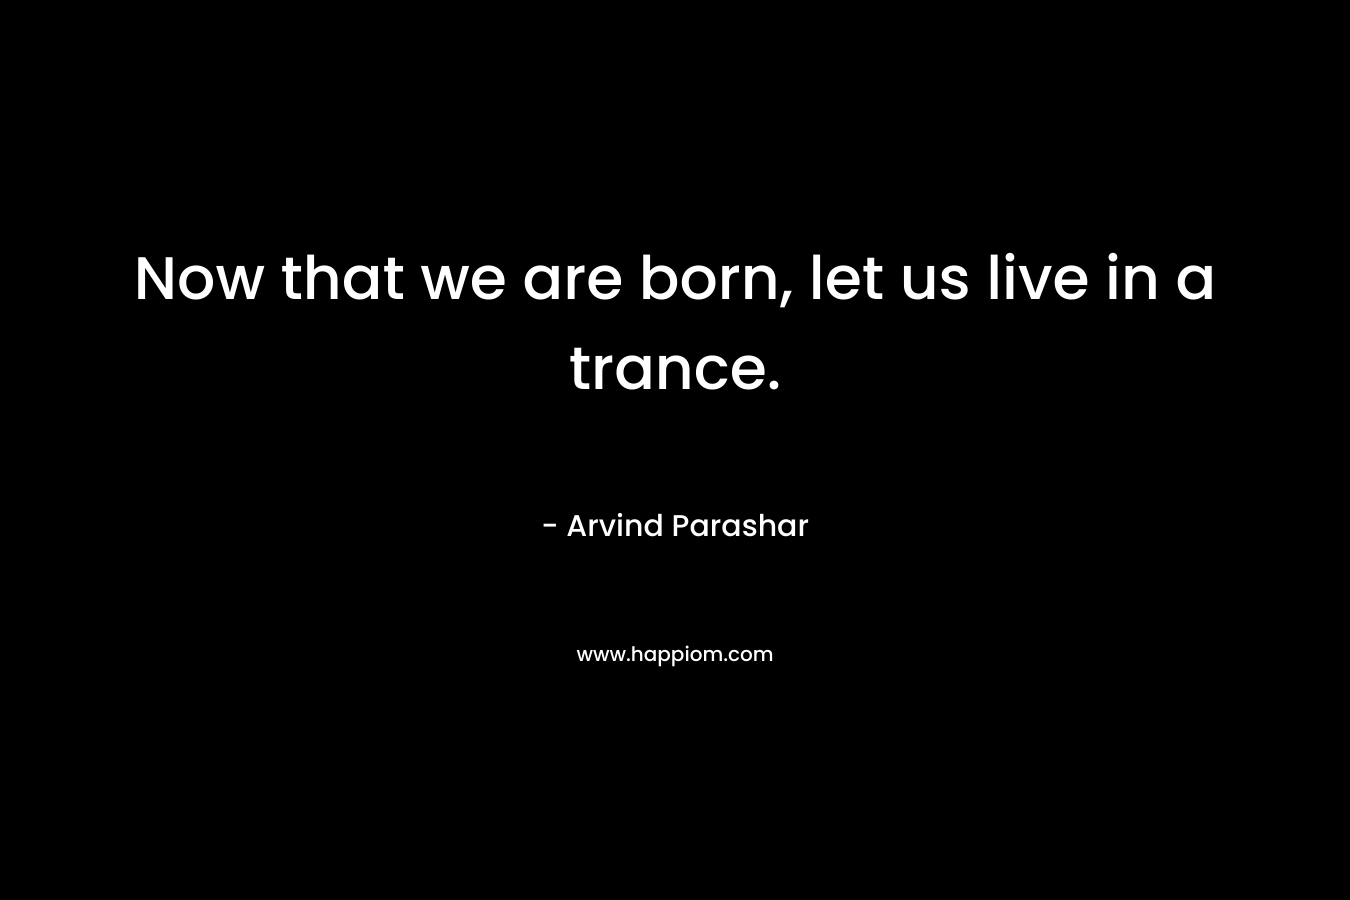 Now that we are born, let us live in a trance. – Arvind Parashar